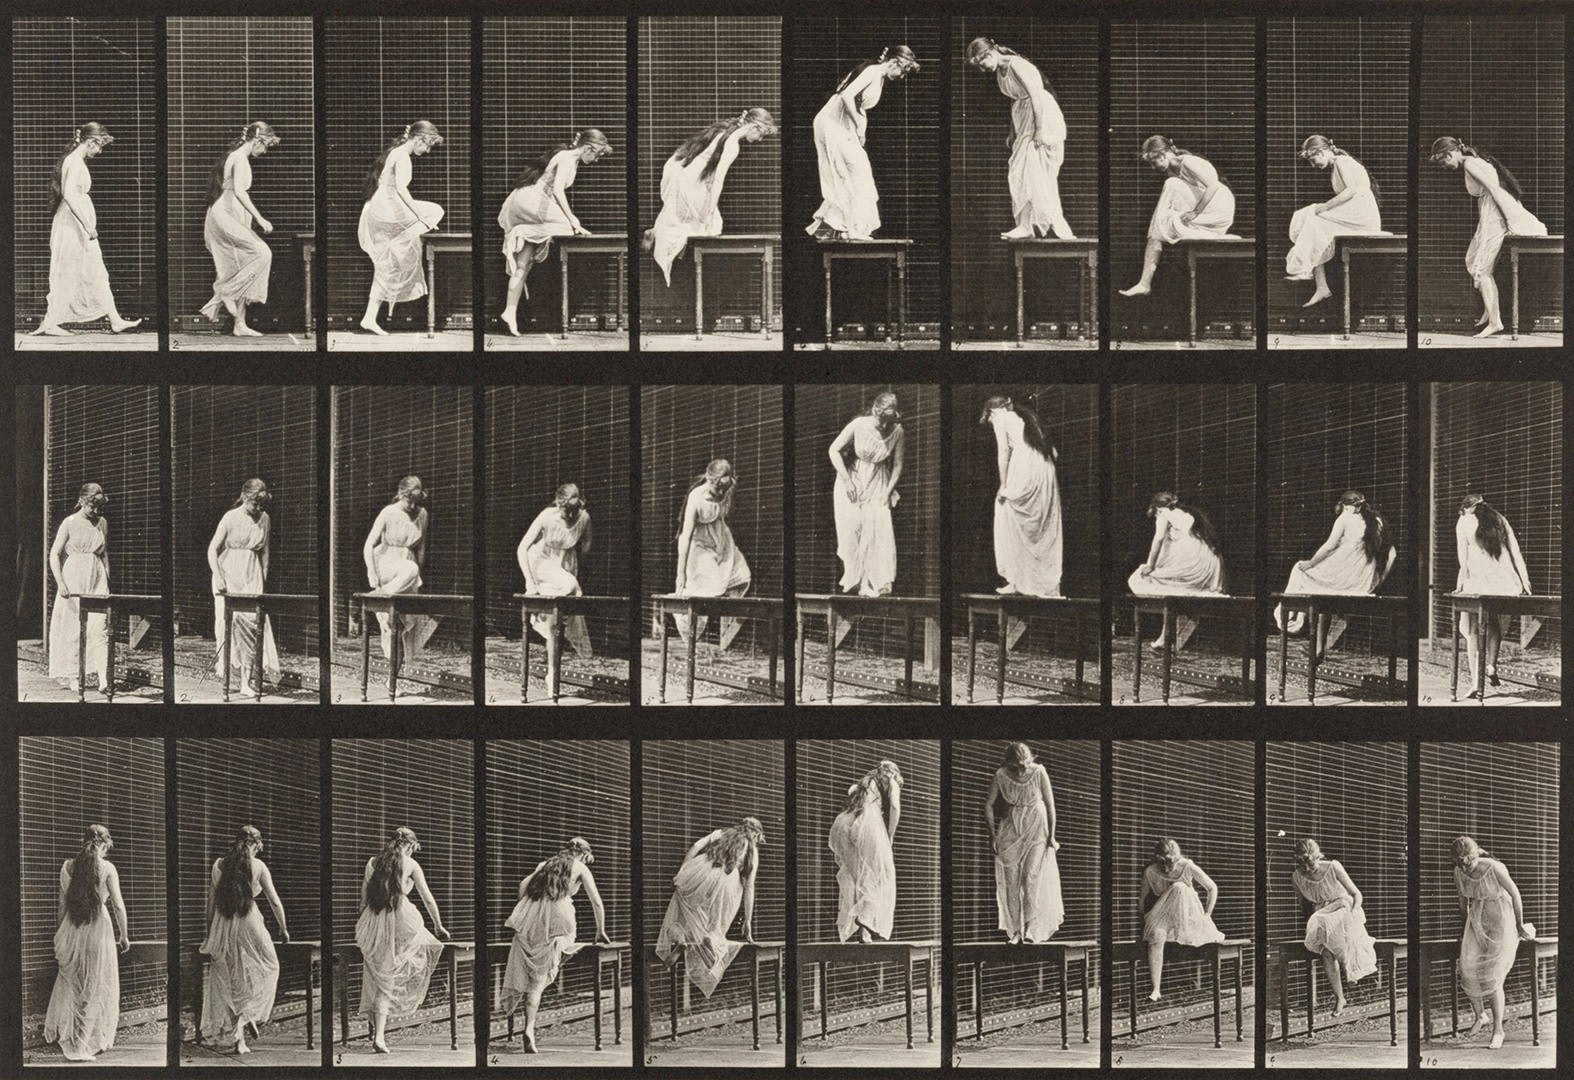 Sequence of black and white photos showing the movements of a woman with long hair in a dress getting on and off of a table